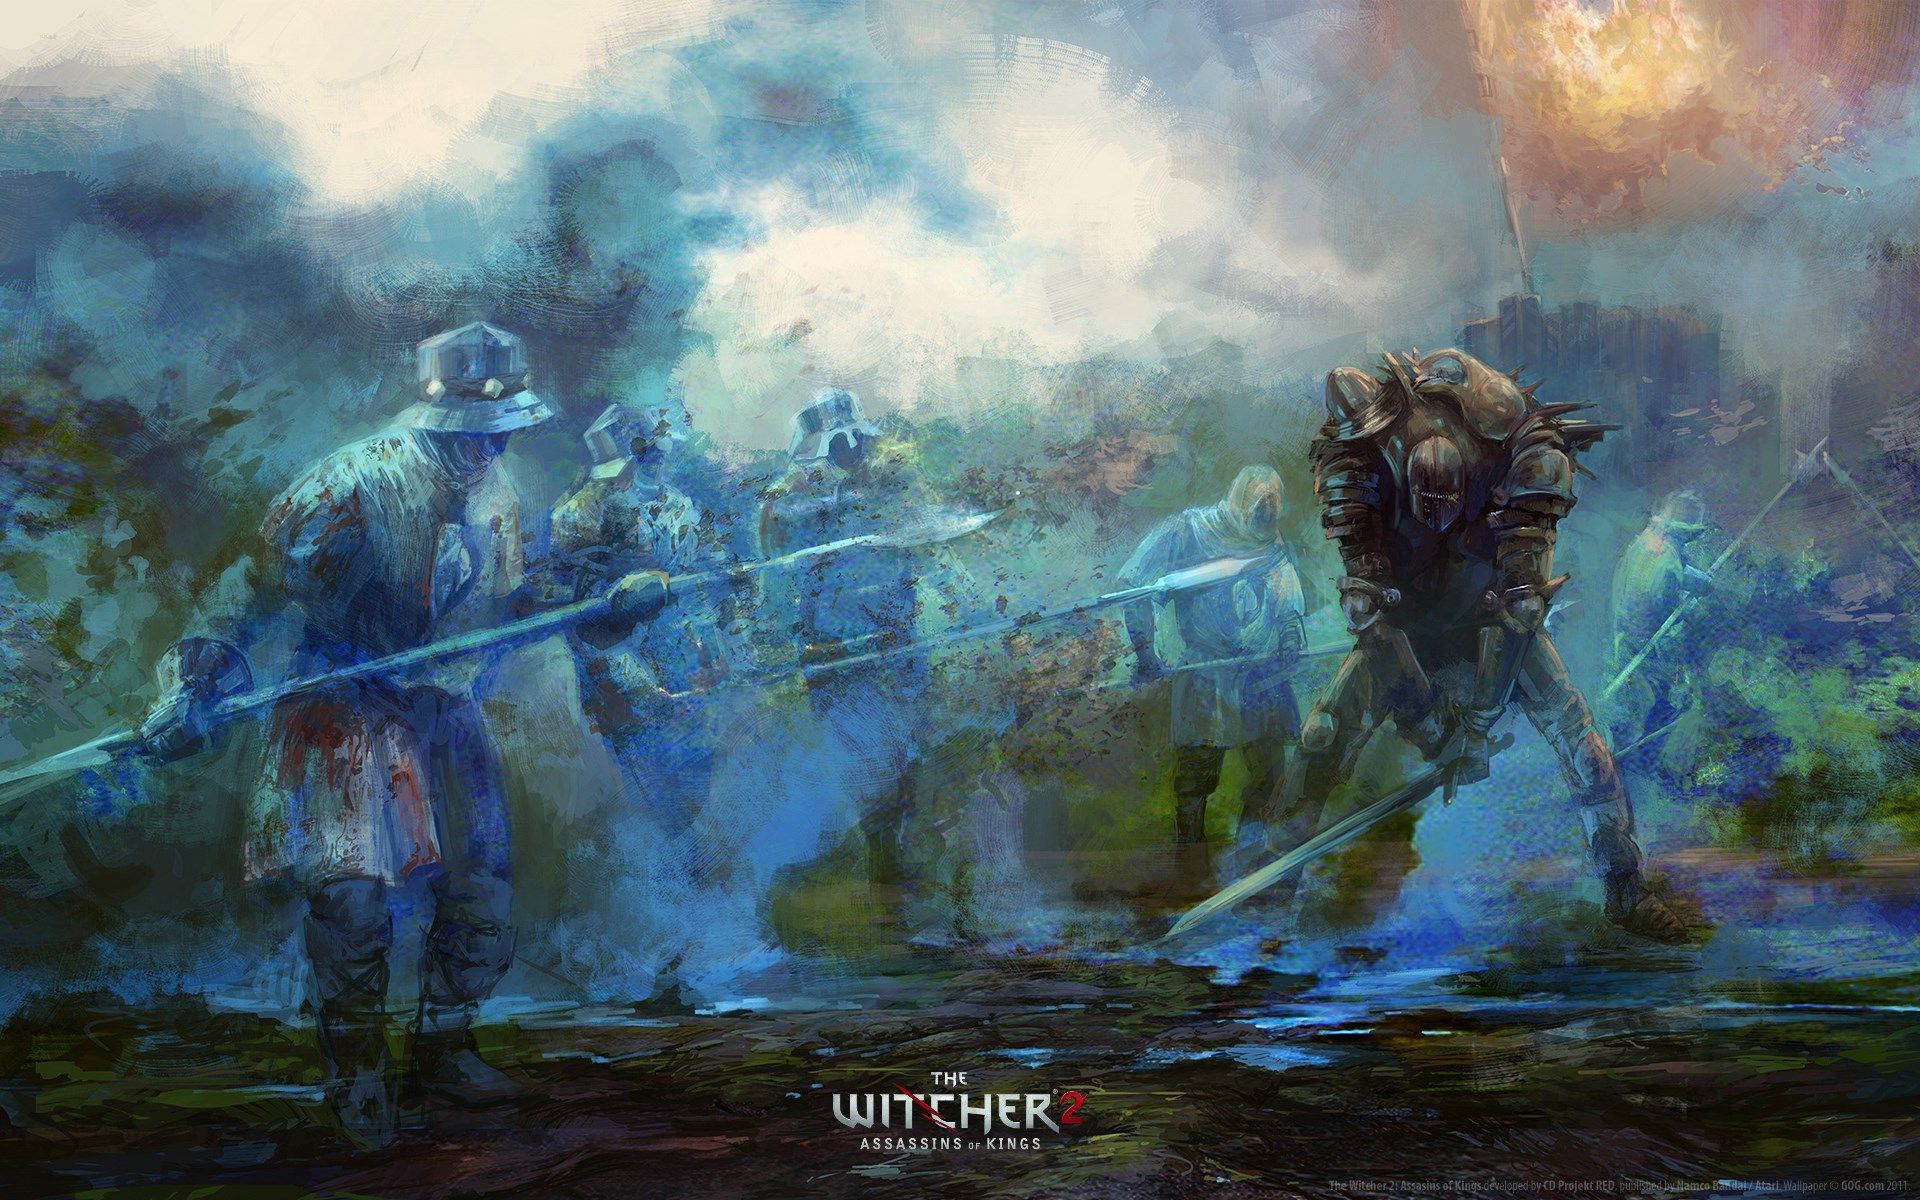 the witcher 2 assassins of kings, Wallpaper Collection. The witcher, Concept art, Art